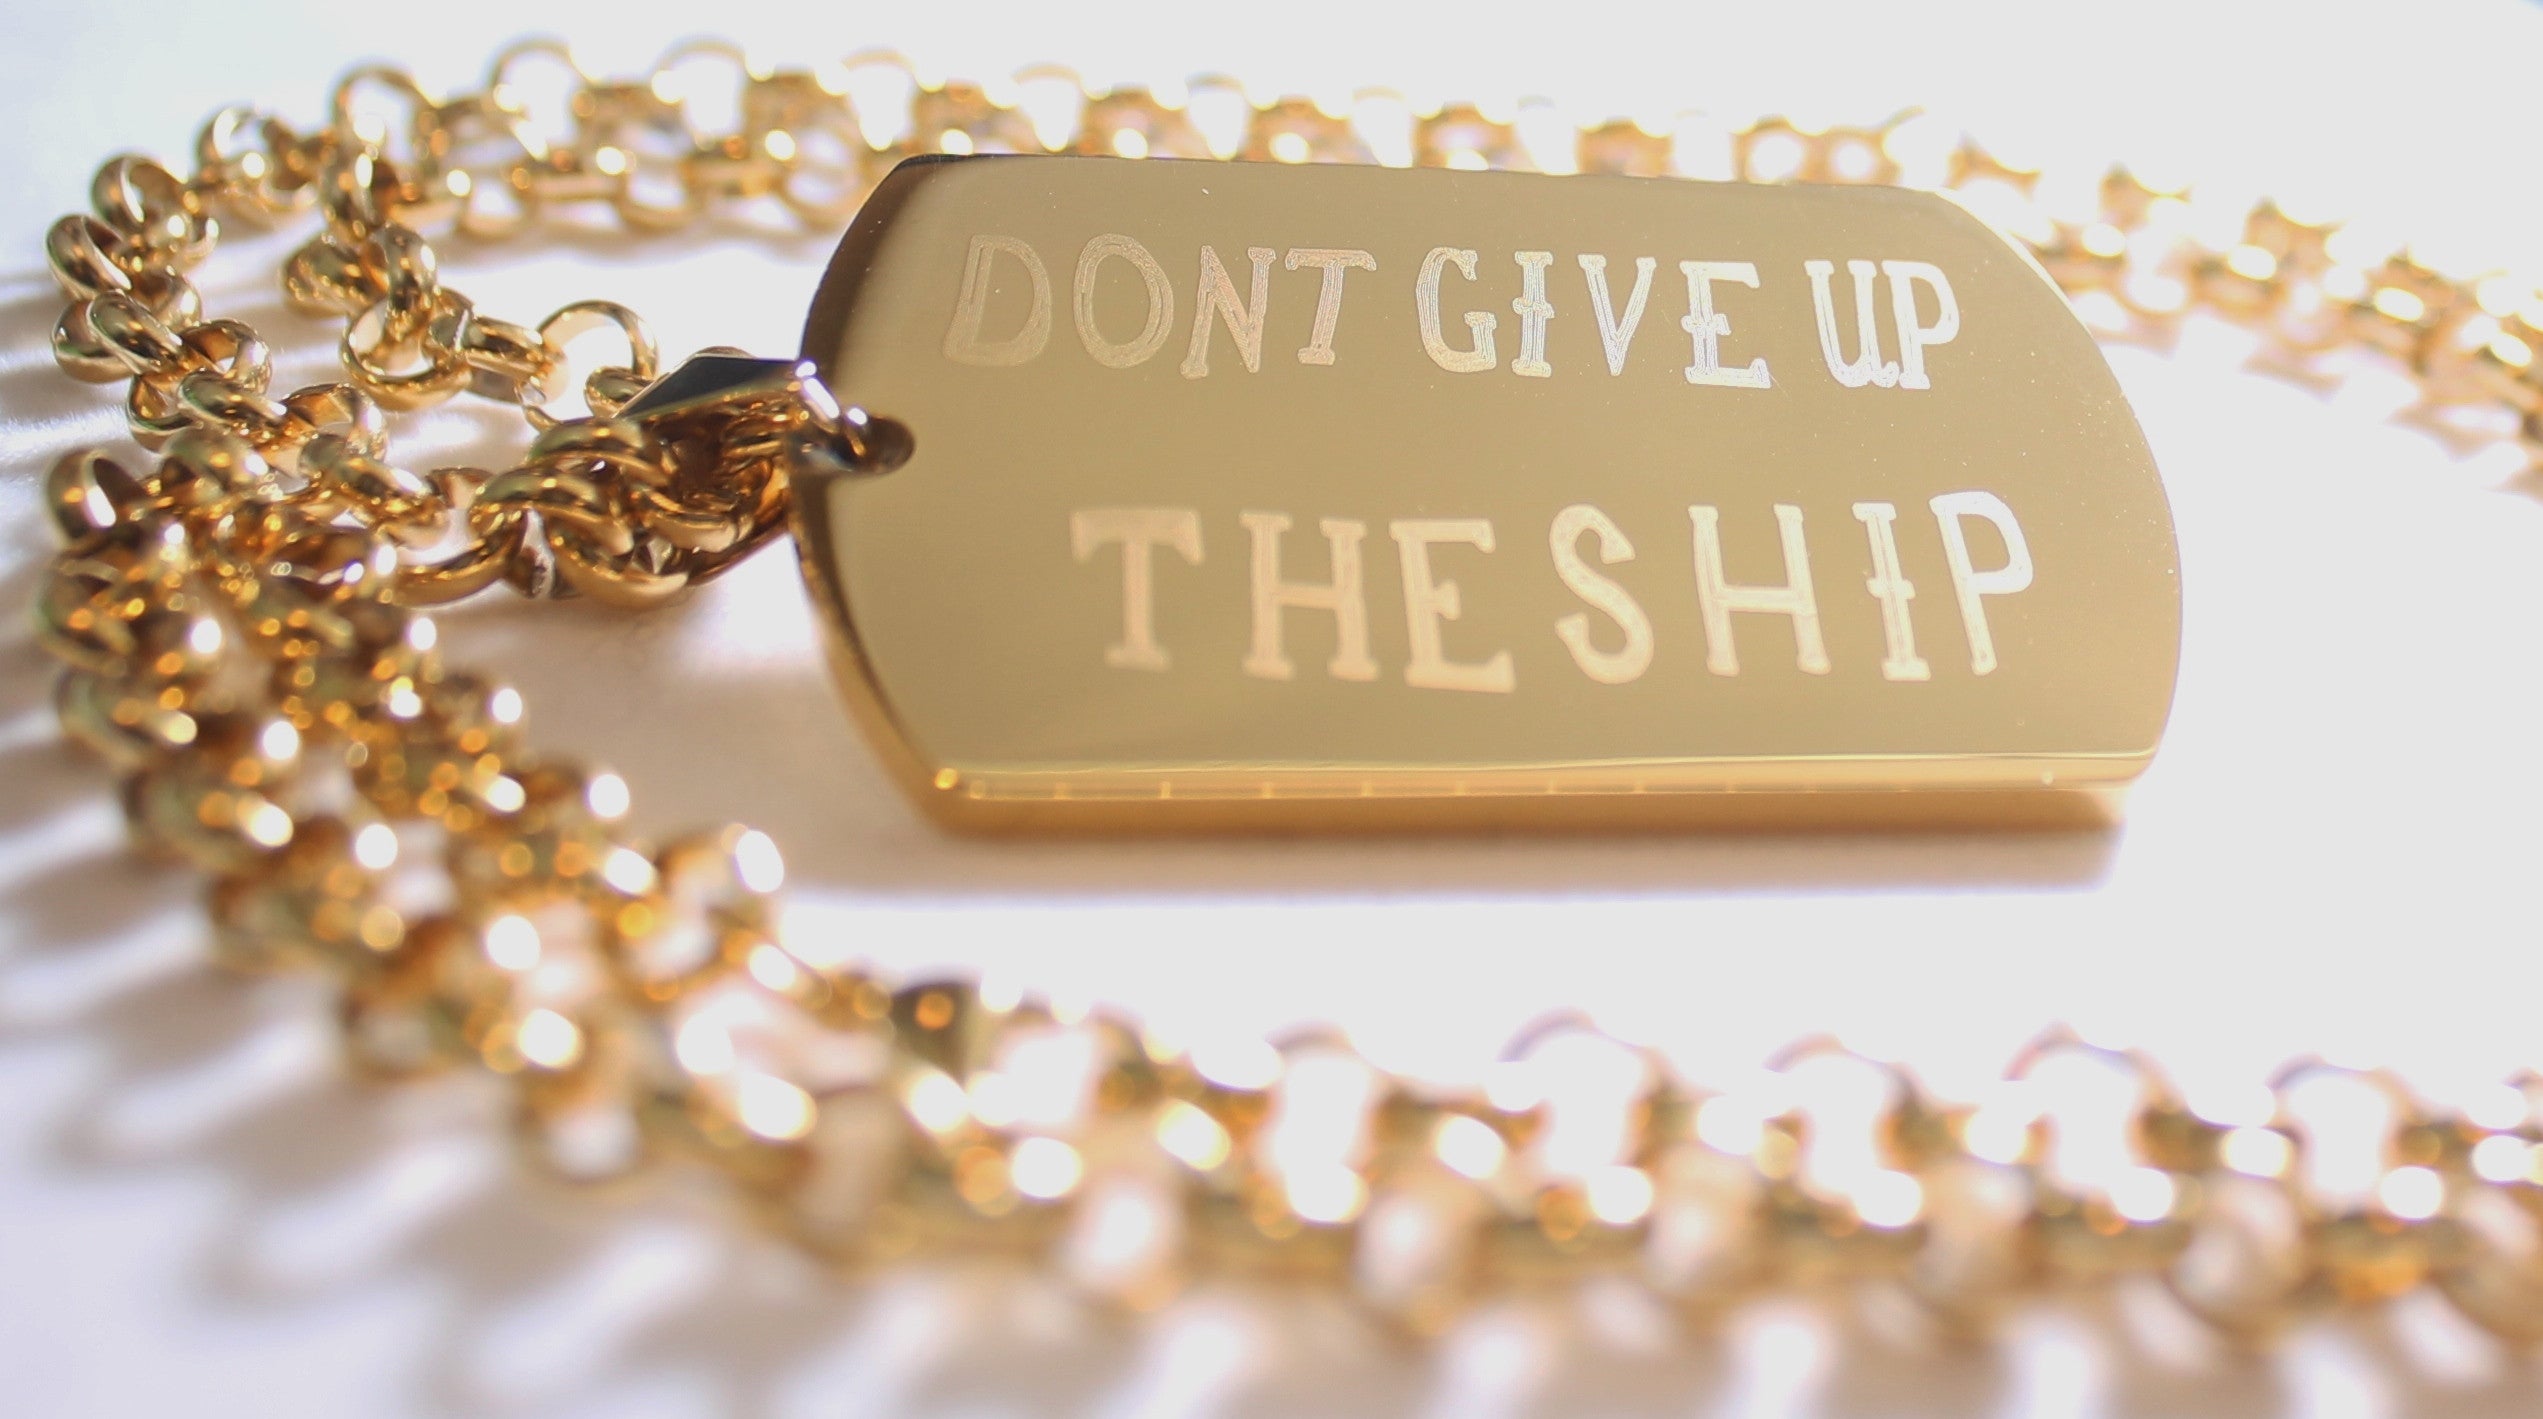 DONT GIVE UP THE SHIP IPG GOLD NAVY MILITARY MOTIVATIONAL THICK STAINLESS STEEL DOG TAG ROLO CHAIN - Samstagsandmore